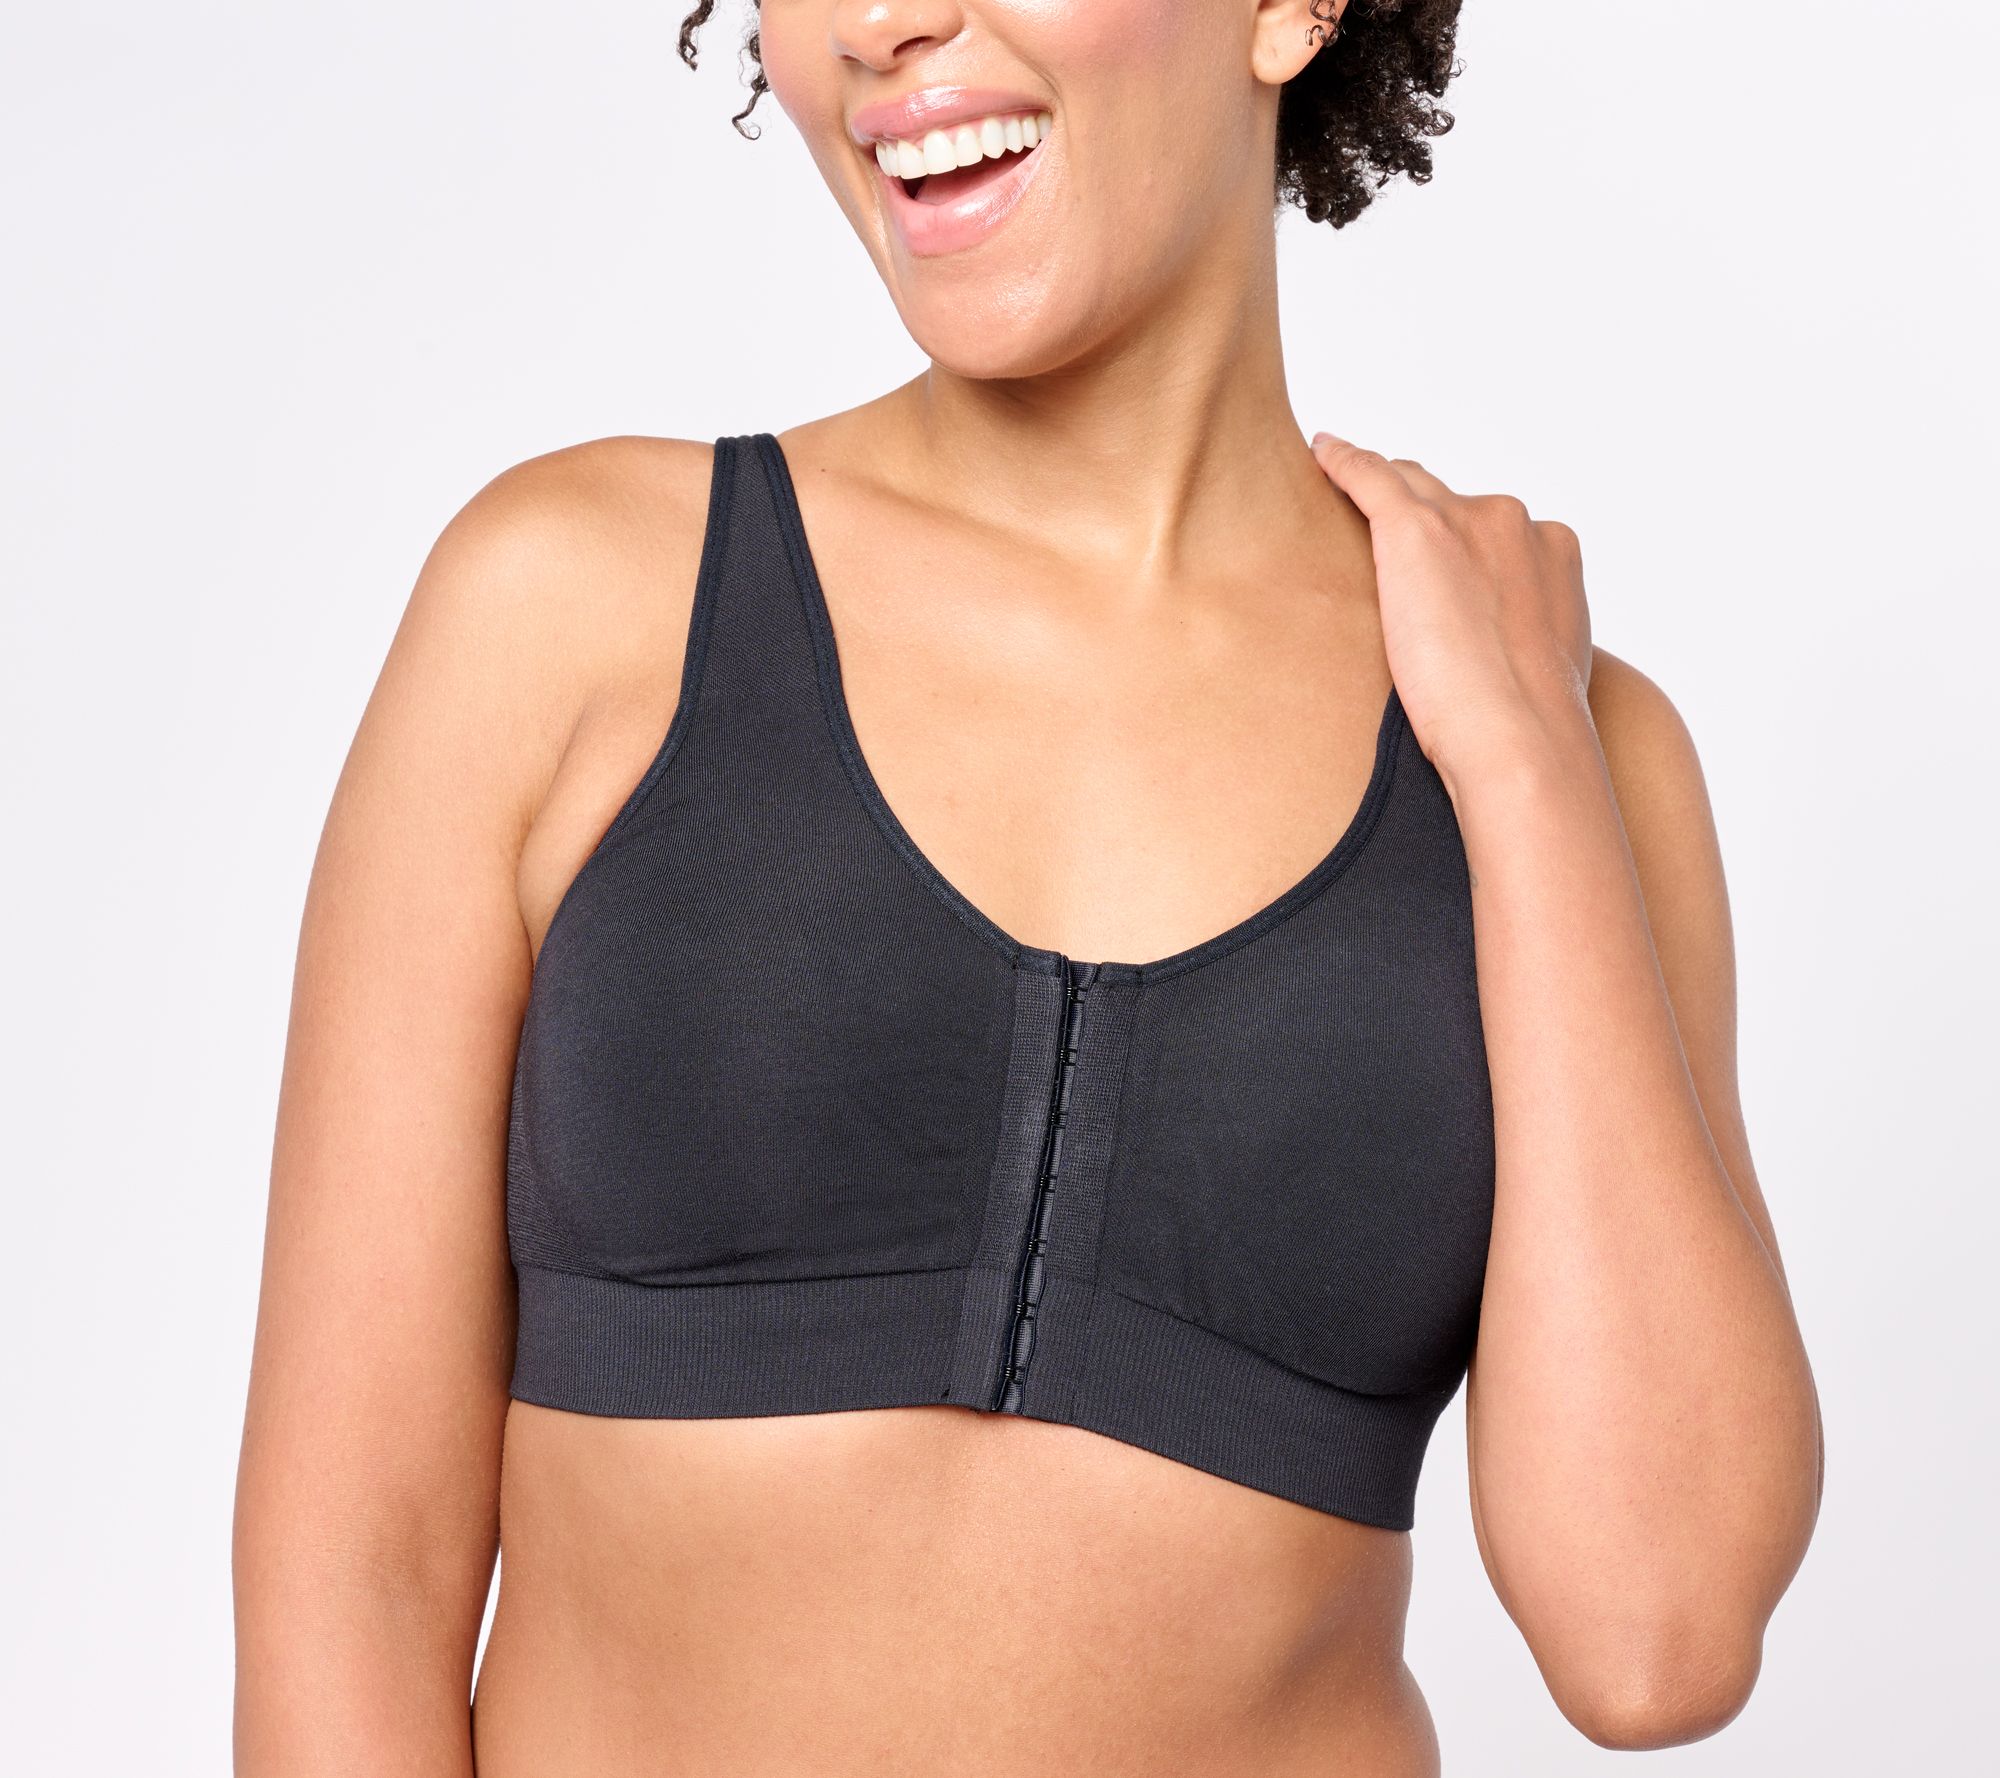 Mrat Clearance Sports Bras for Women Everyday Cotton Front Closure